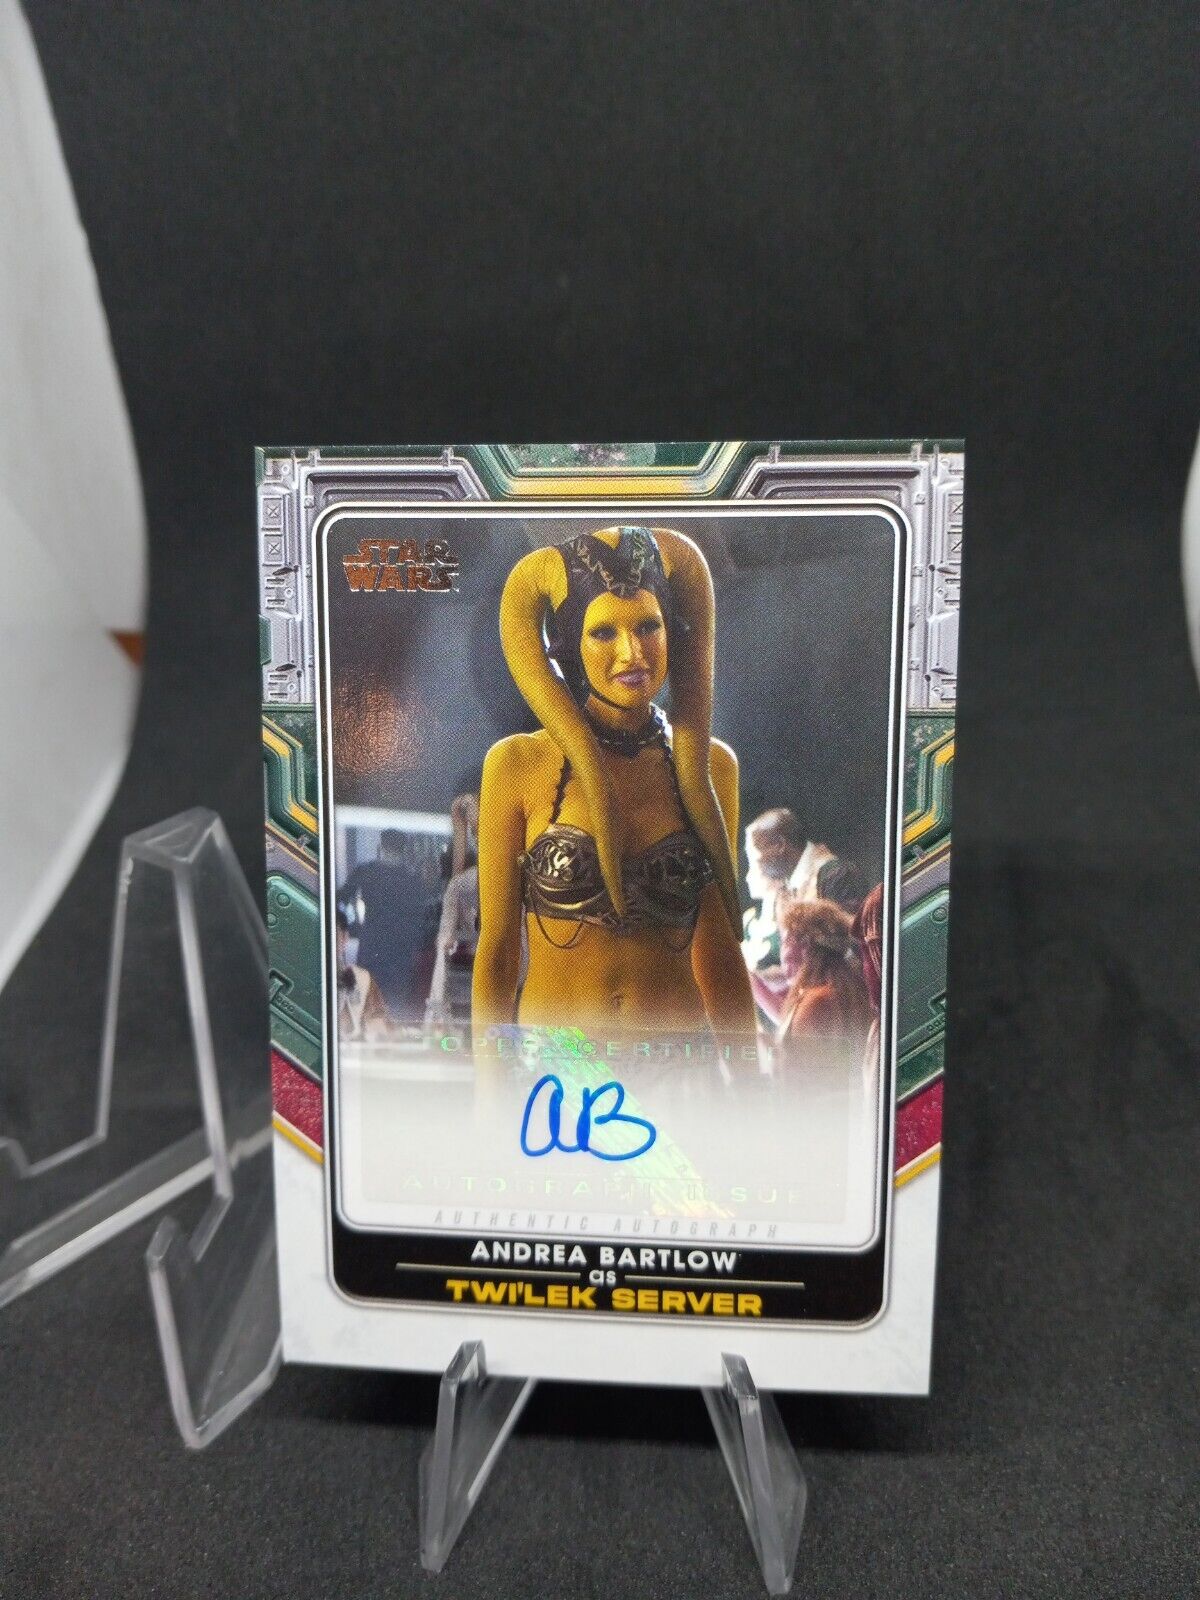 ANDREA BARTLOW as Twi’lek Server 2022 Star Wars The Book Of Boba Fett Auto